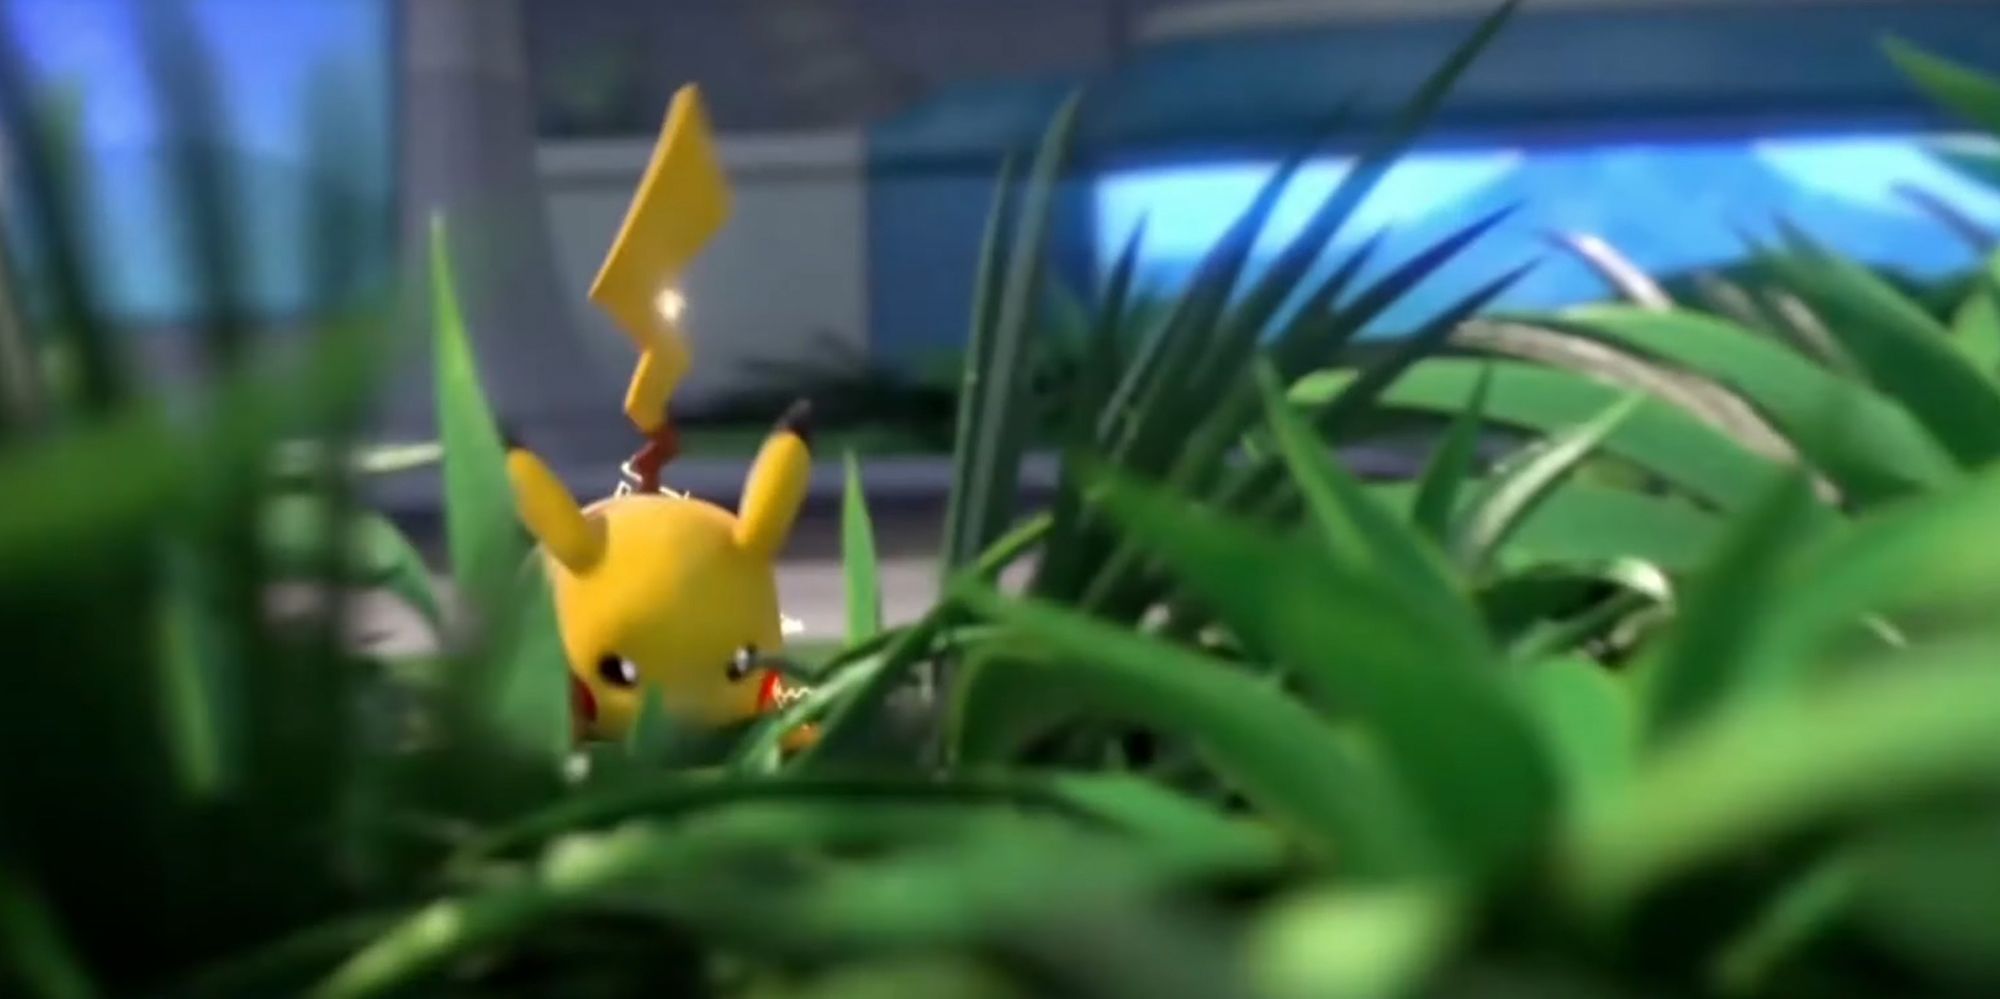 Pokemon Unite - Pikachu Sneaking In The Brush In The Cinematic Trailer For The Game